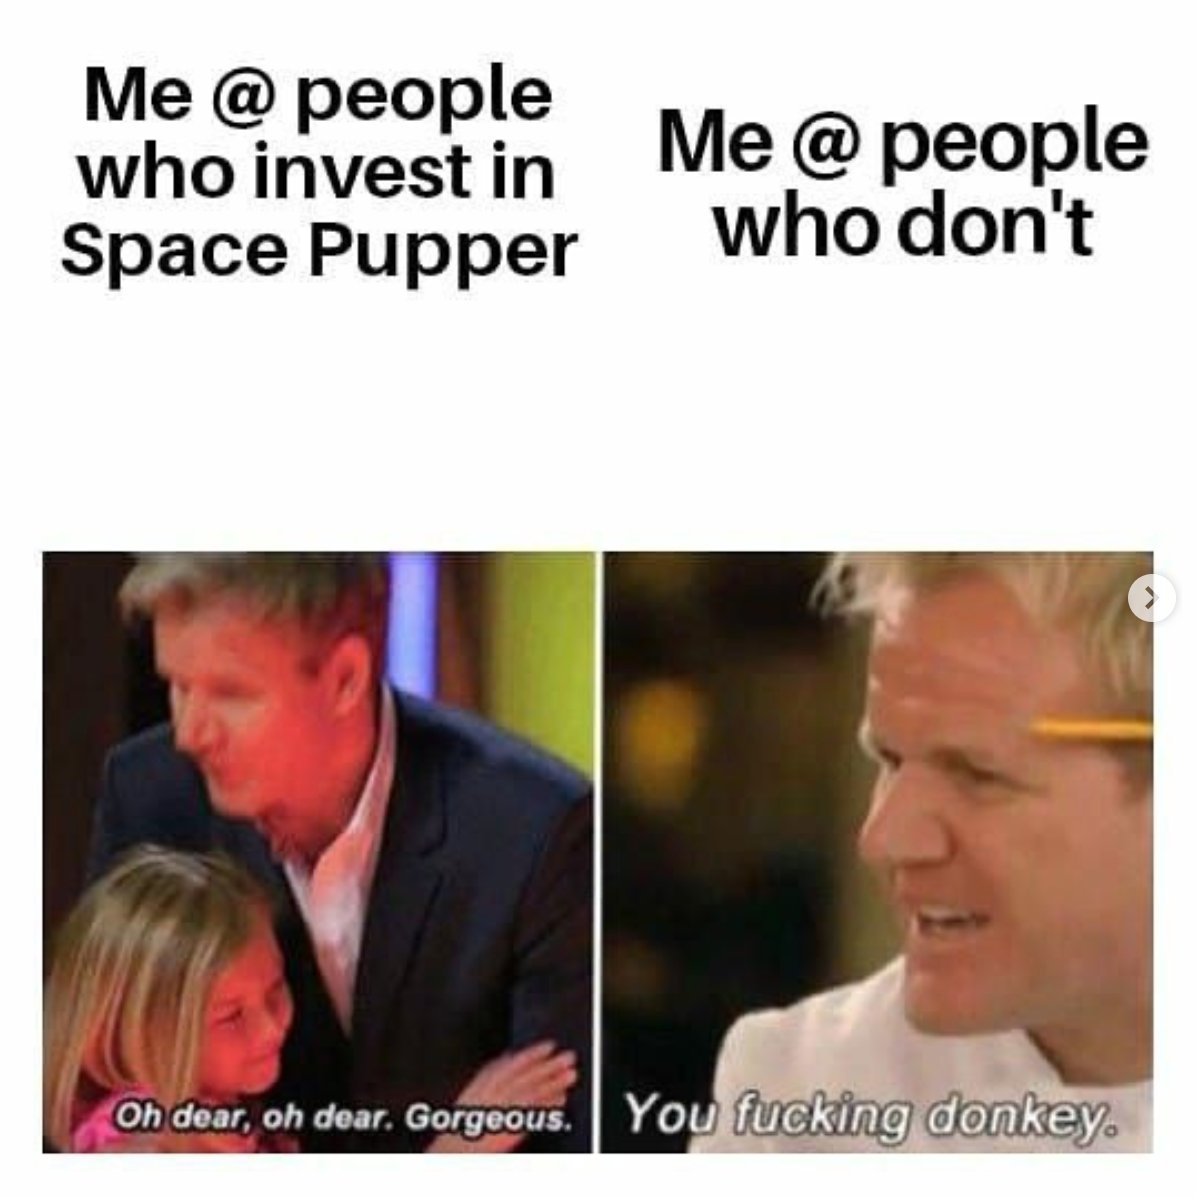 Word has it that Gordon Ramsay is searching for you!

Space Pupper Token Address: 0x705220142db829e054Ee06351c06ba814dA2a89B
https://t.co/wVny72SkB0 https://t.co/Ed03tX9CAo